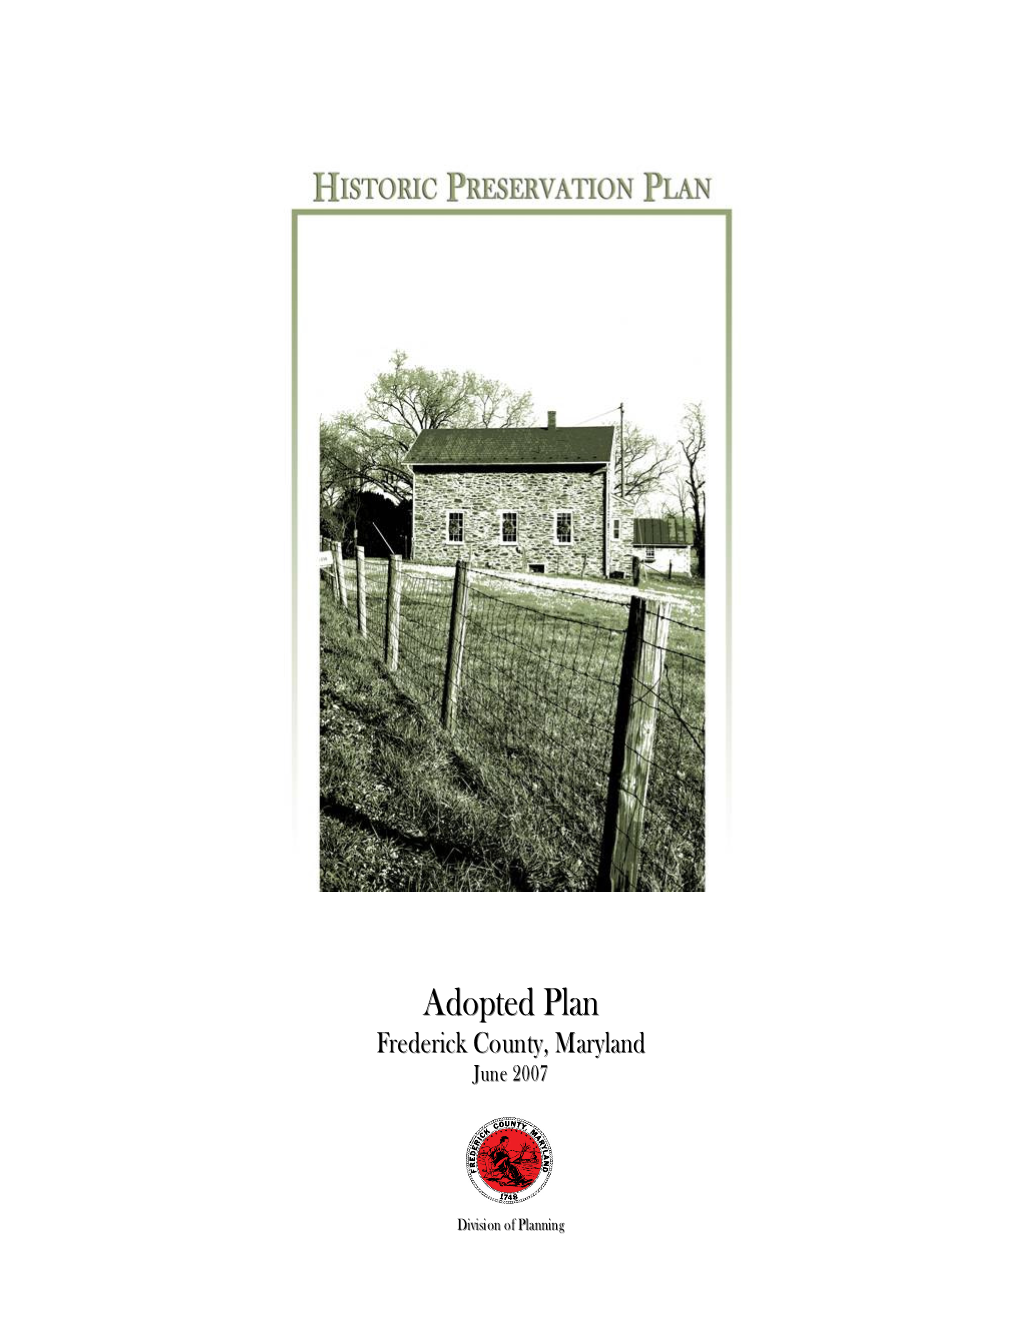 Frederick County Historic Preservation Plan 7